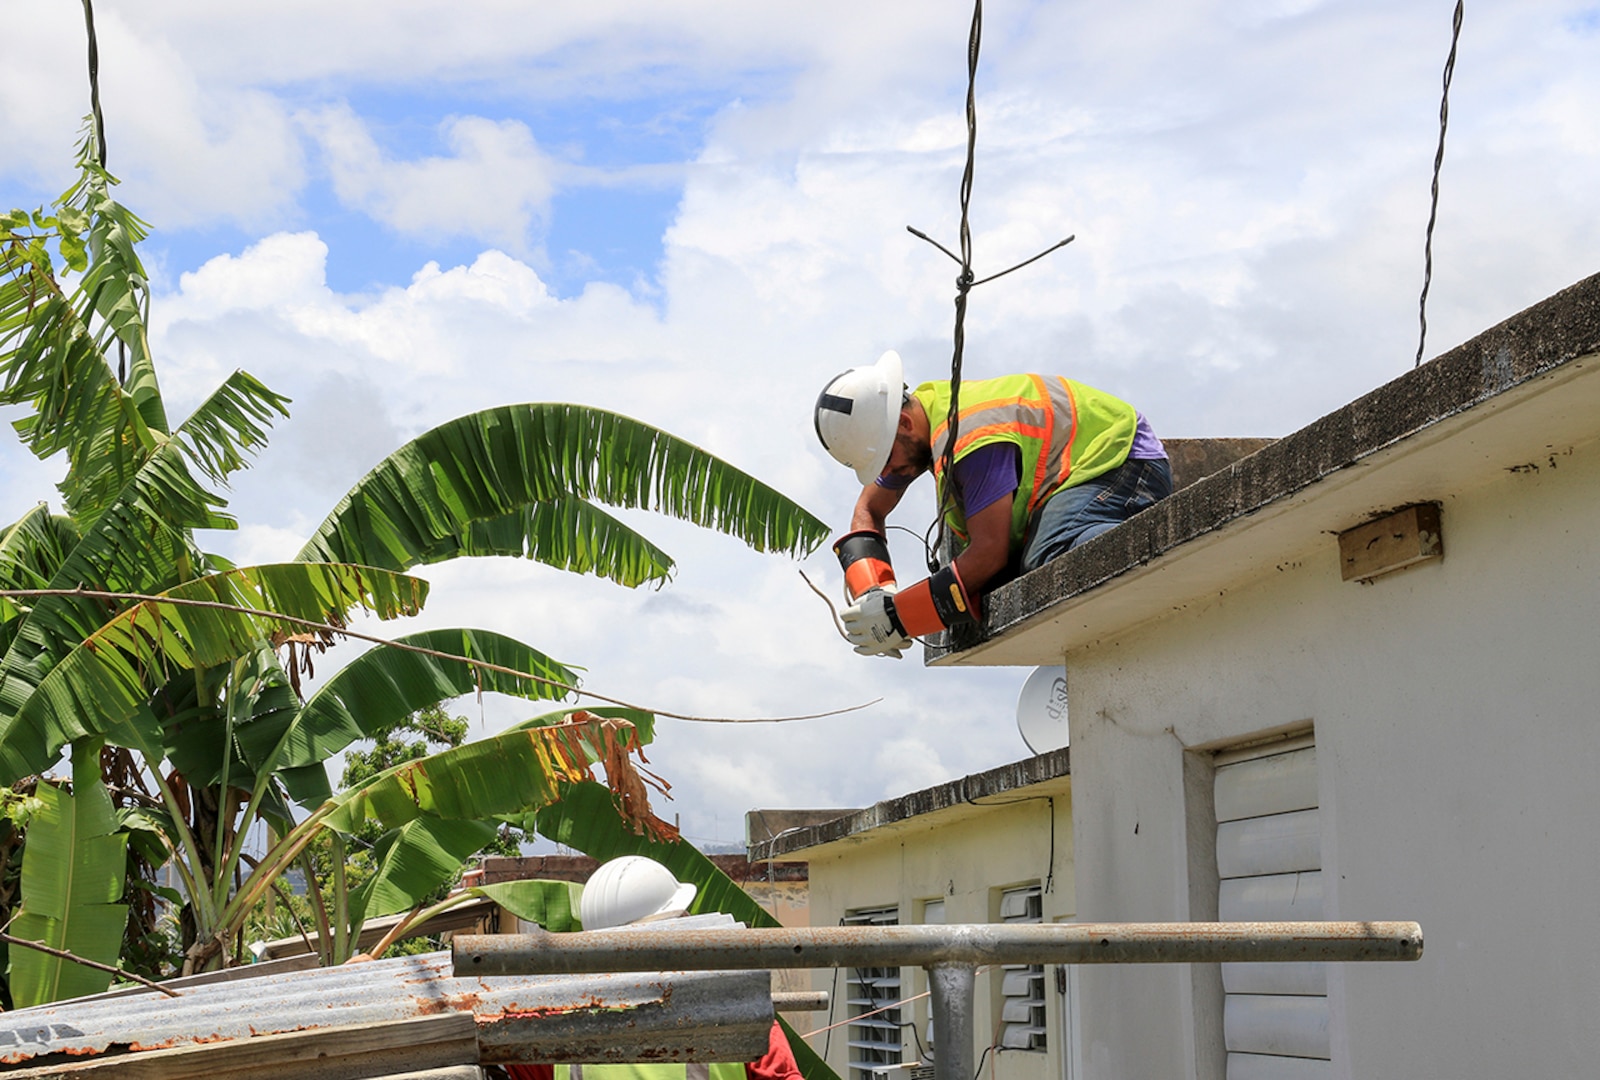 U.S. Army Corps of Engineers contractors work to restore the electrical grid in the Villa Alegria neighborhood of Caguas, Puerto Rico.